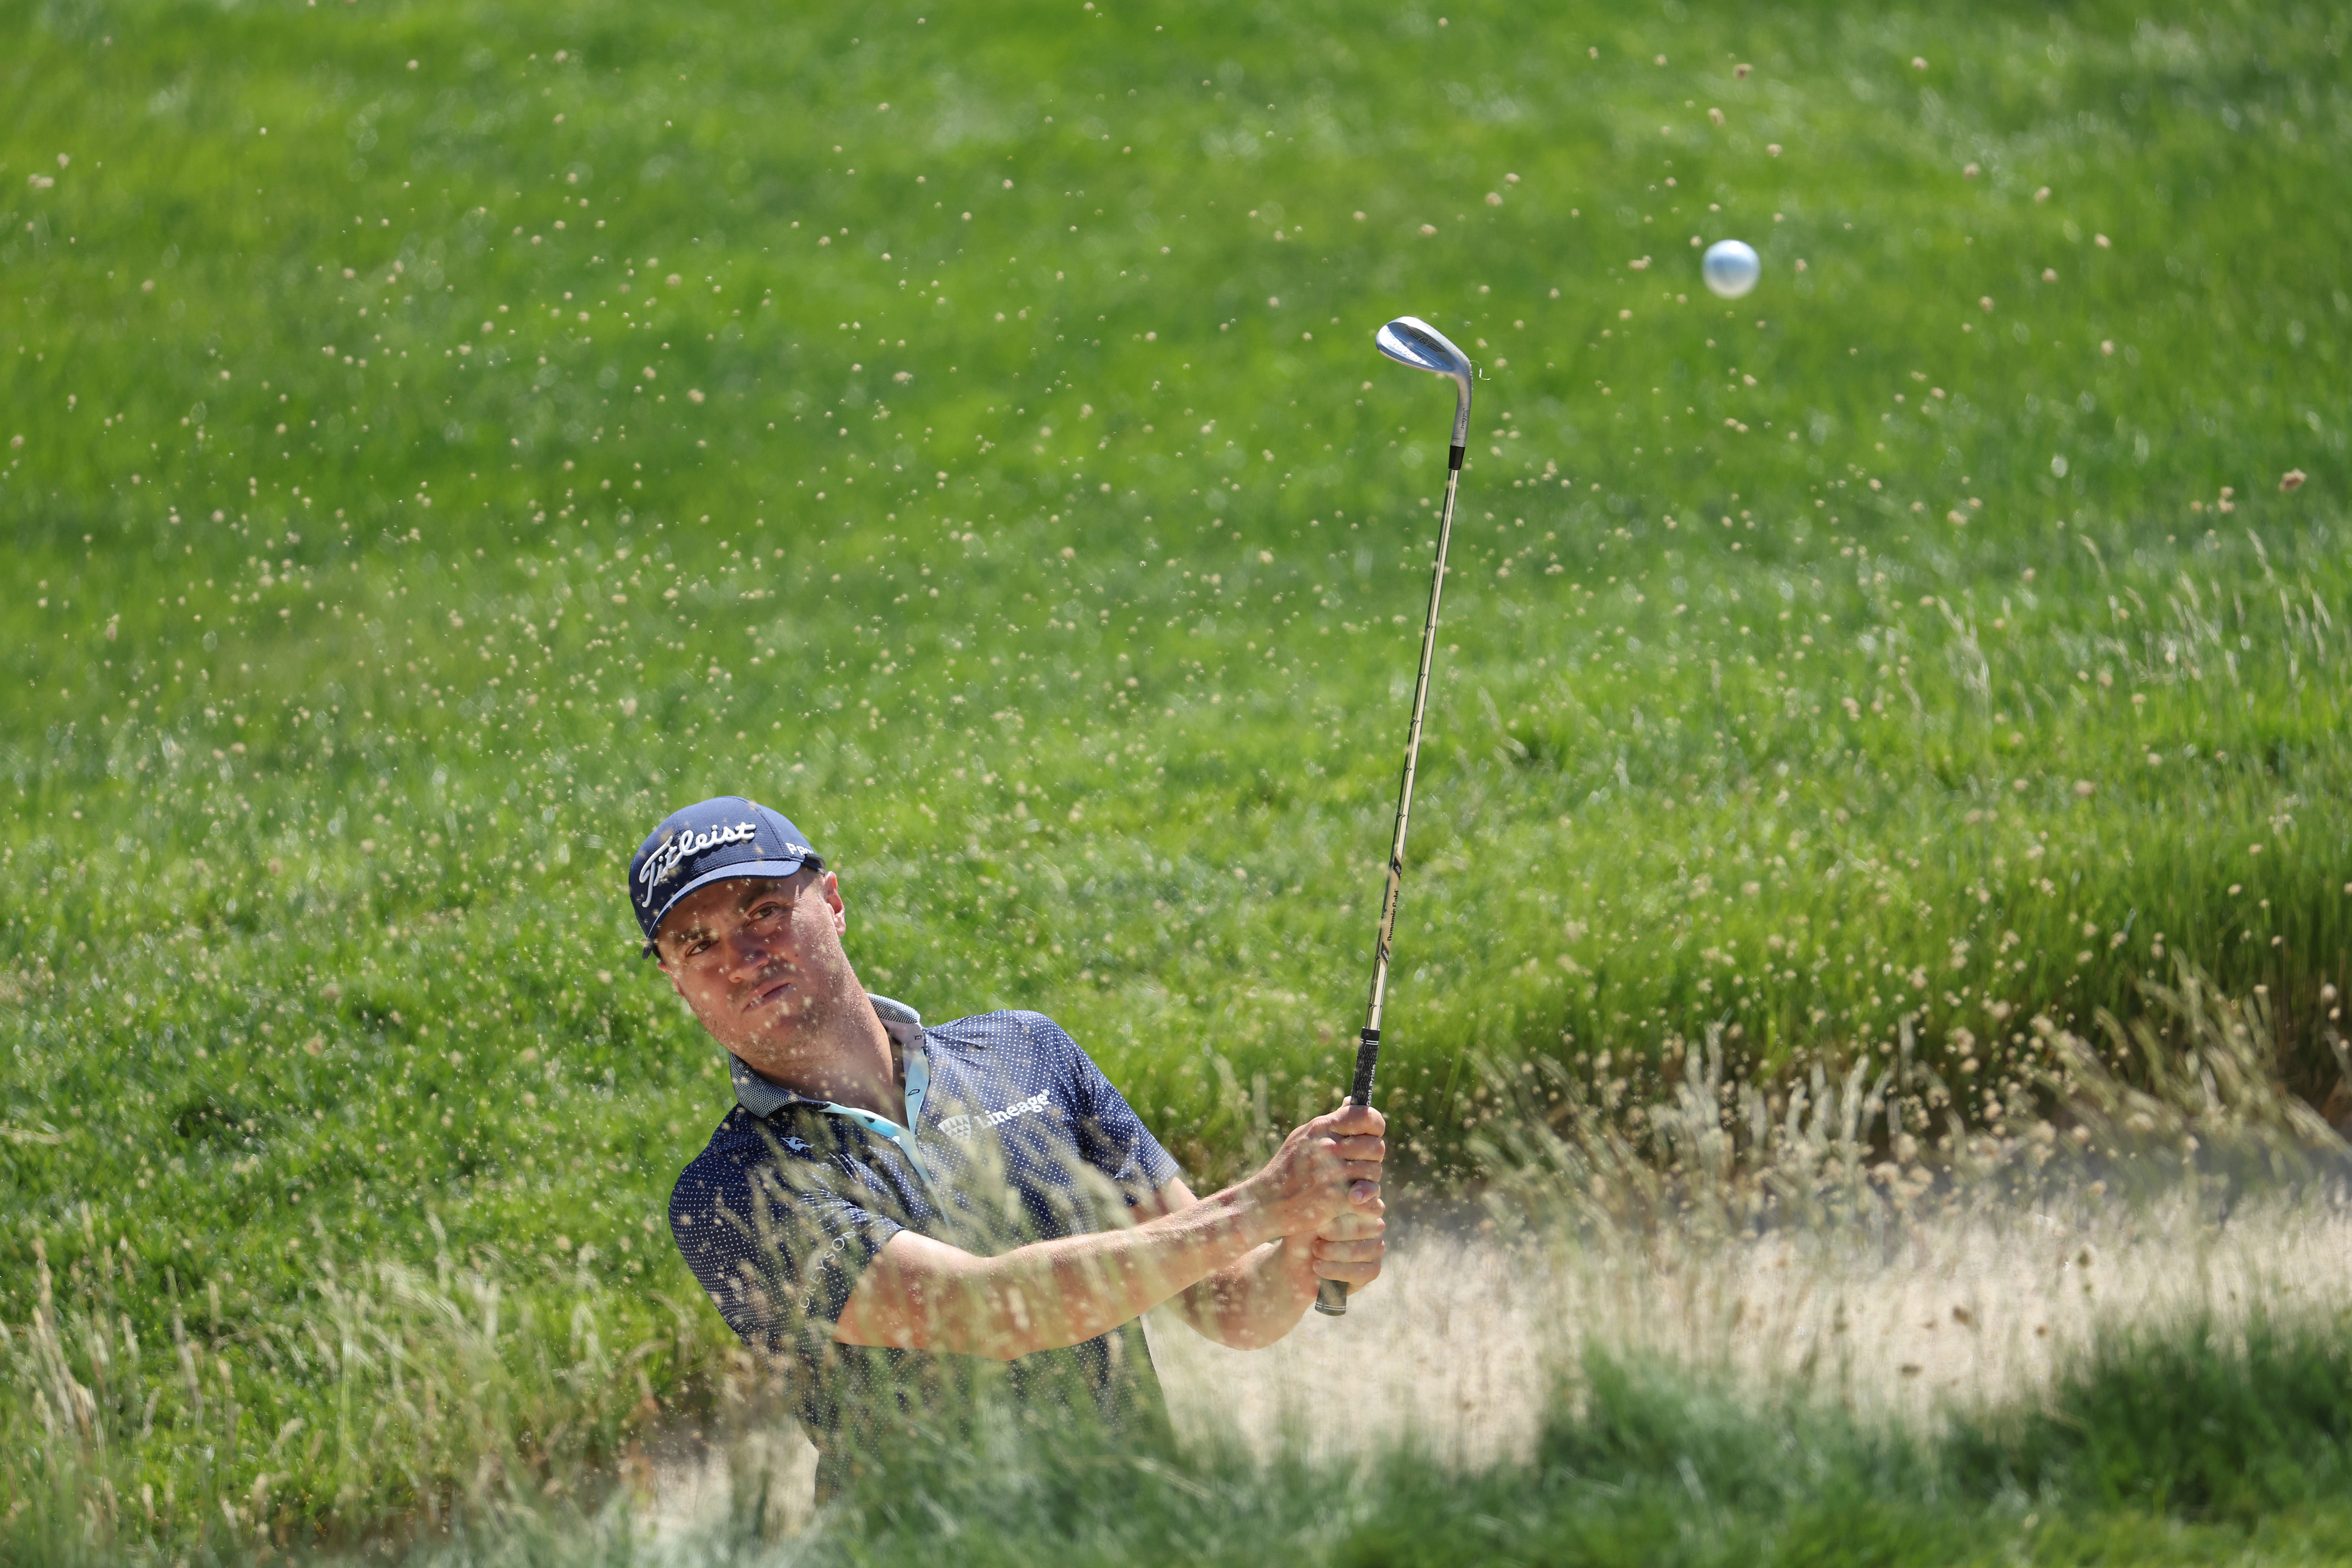 Justin Thomas of the United States plays a shot from a bunker on the fifth hole during a practice round prior to the US Open at The Country Club on June 14, 2022 in Brookline, Massachusetts.